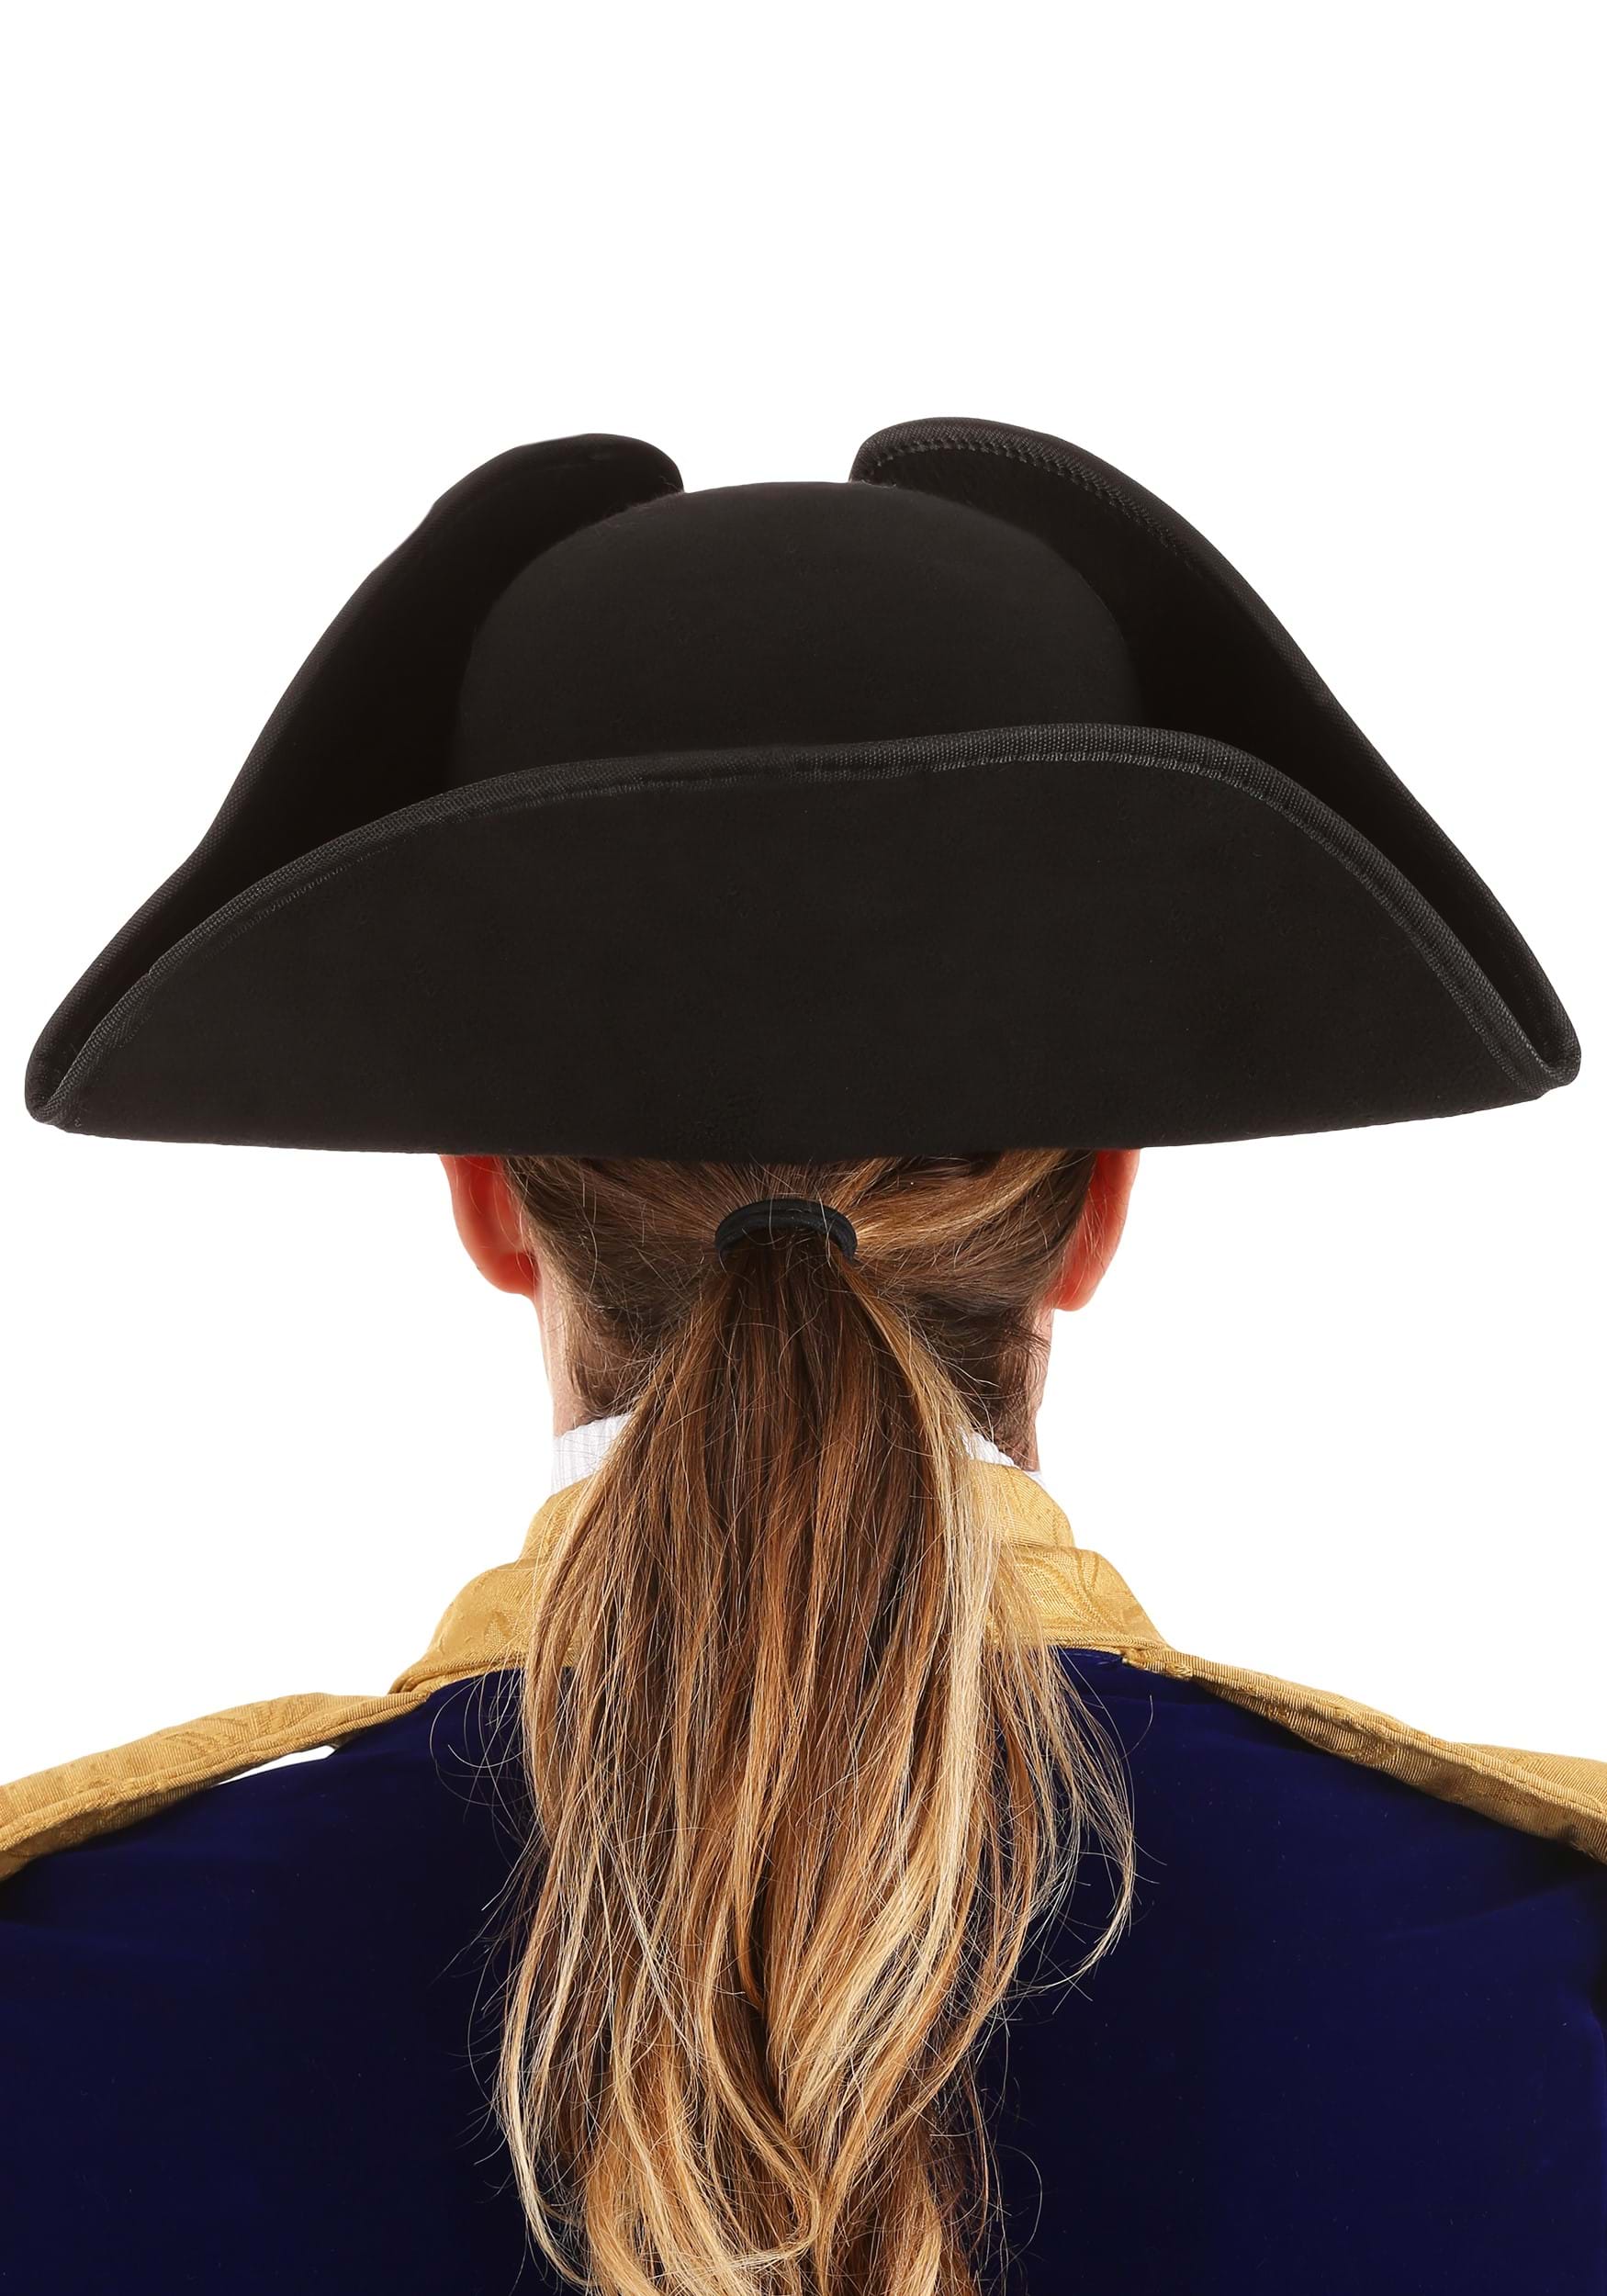 George Washington Hat For Adults